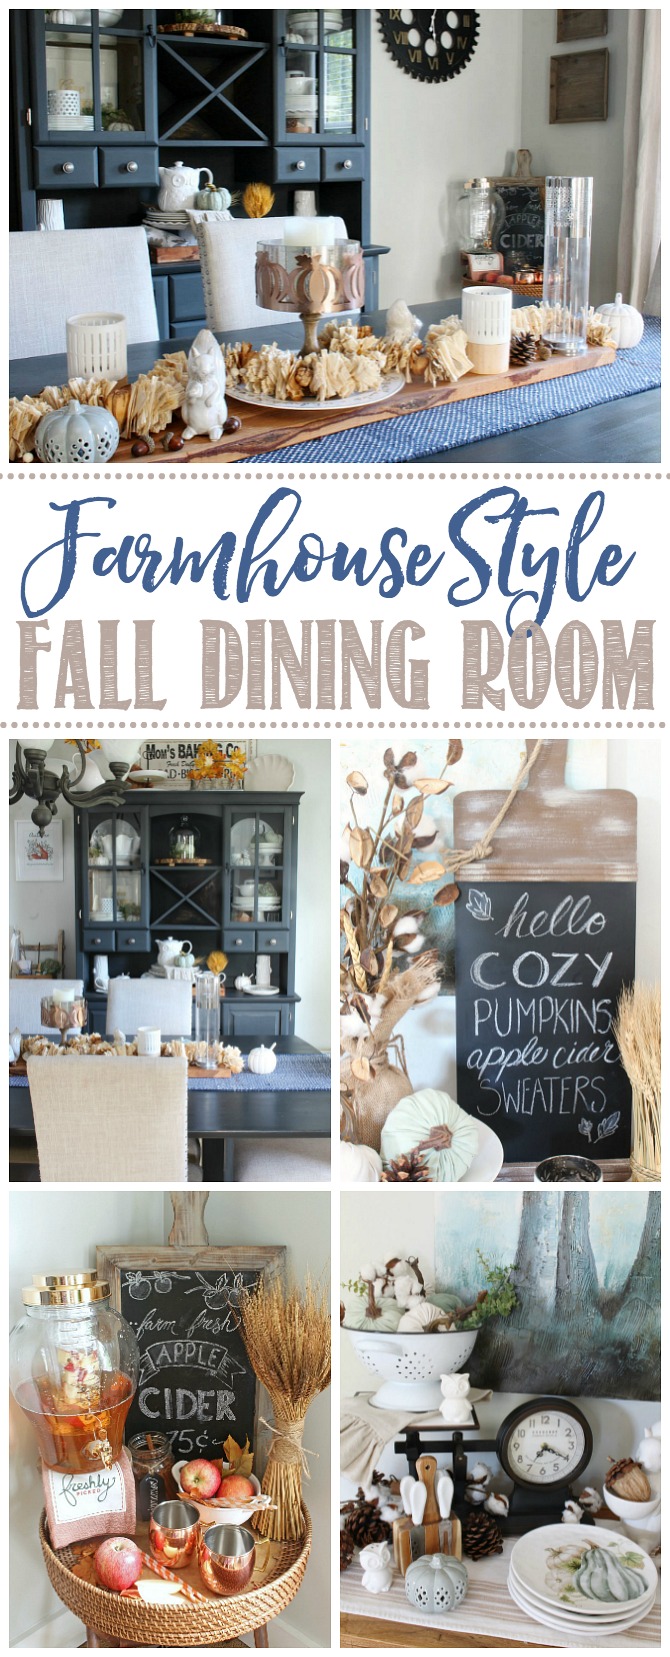 Beautiful collection of fall decorating ideas from this farmhouse style dining room fall home tour.